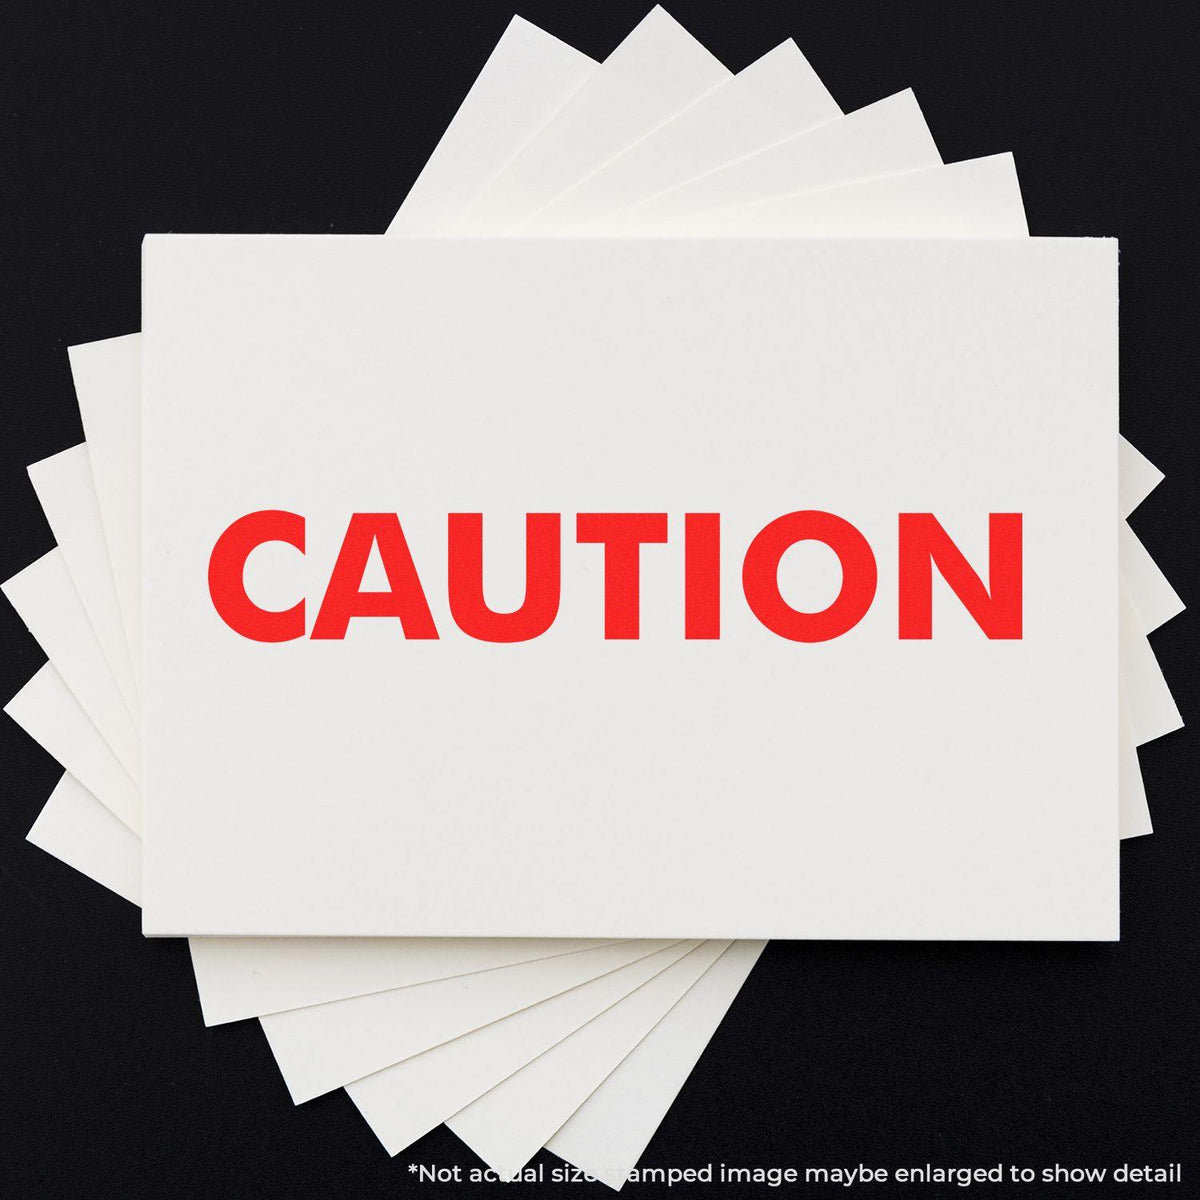 Caution Rubber Stamp In Use Photo